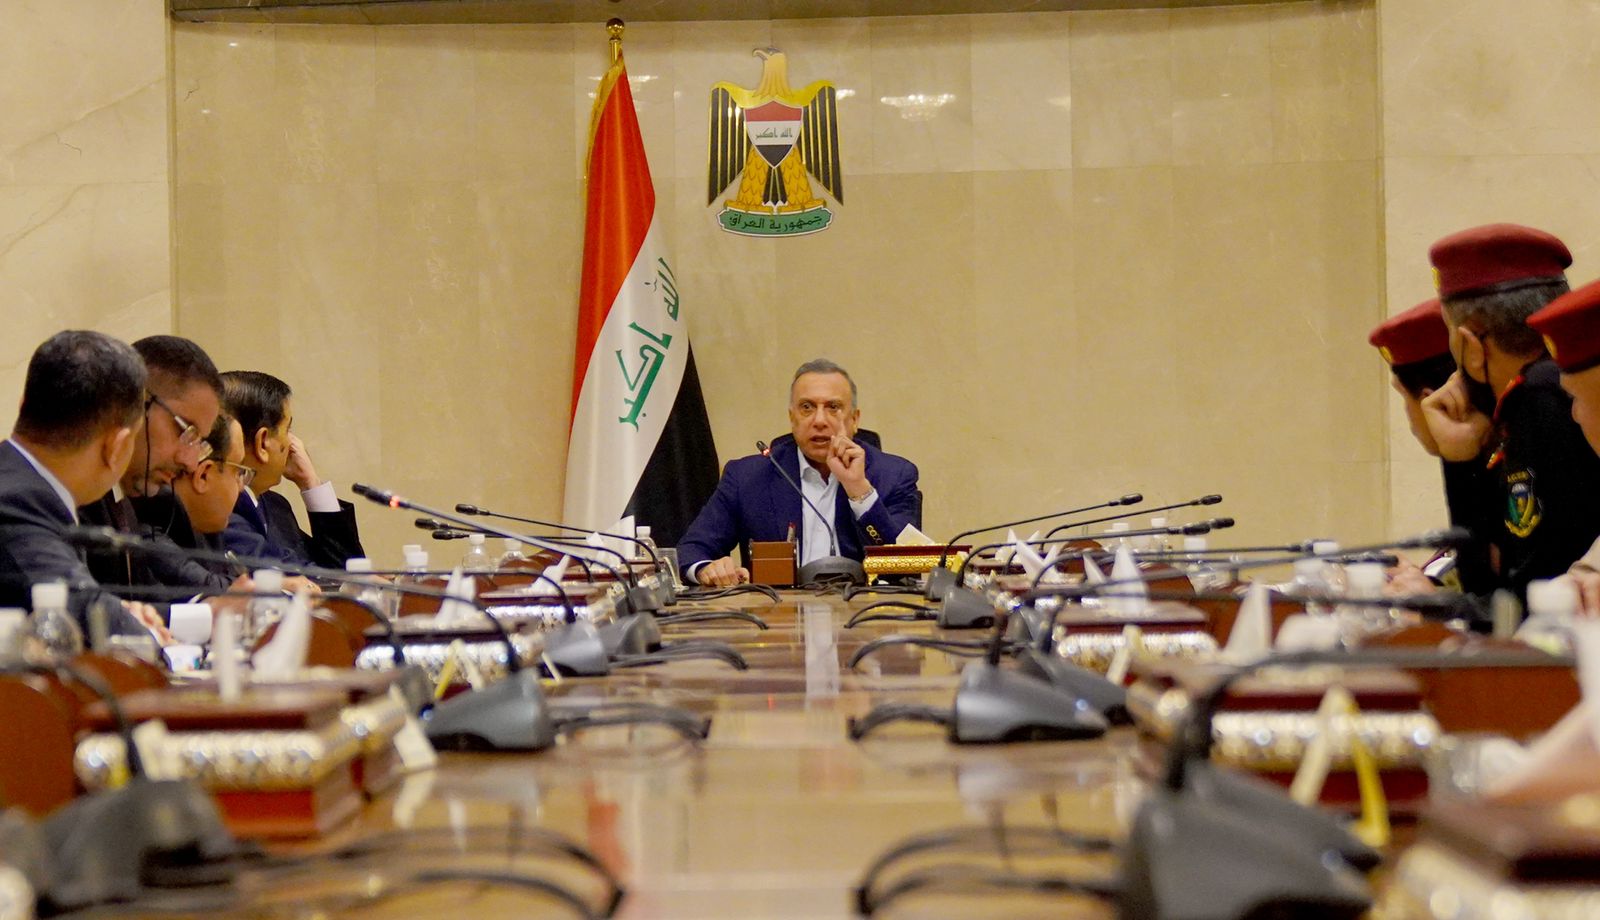 Iraq's PM: we reject "offending" religious symbols or attacking party headquarters